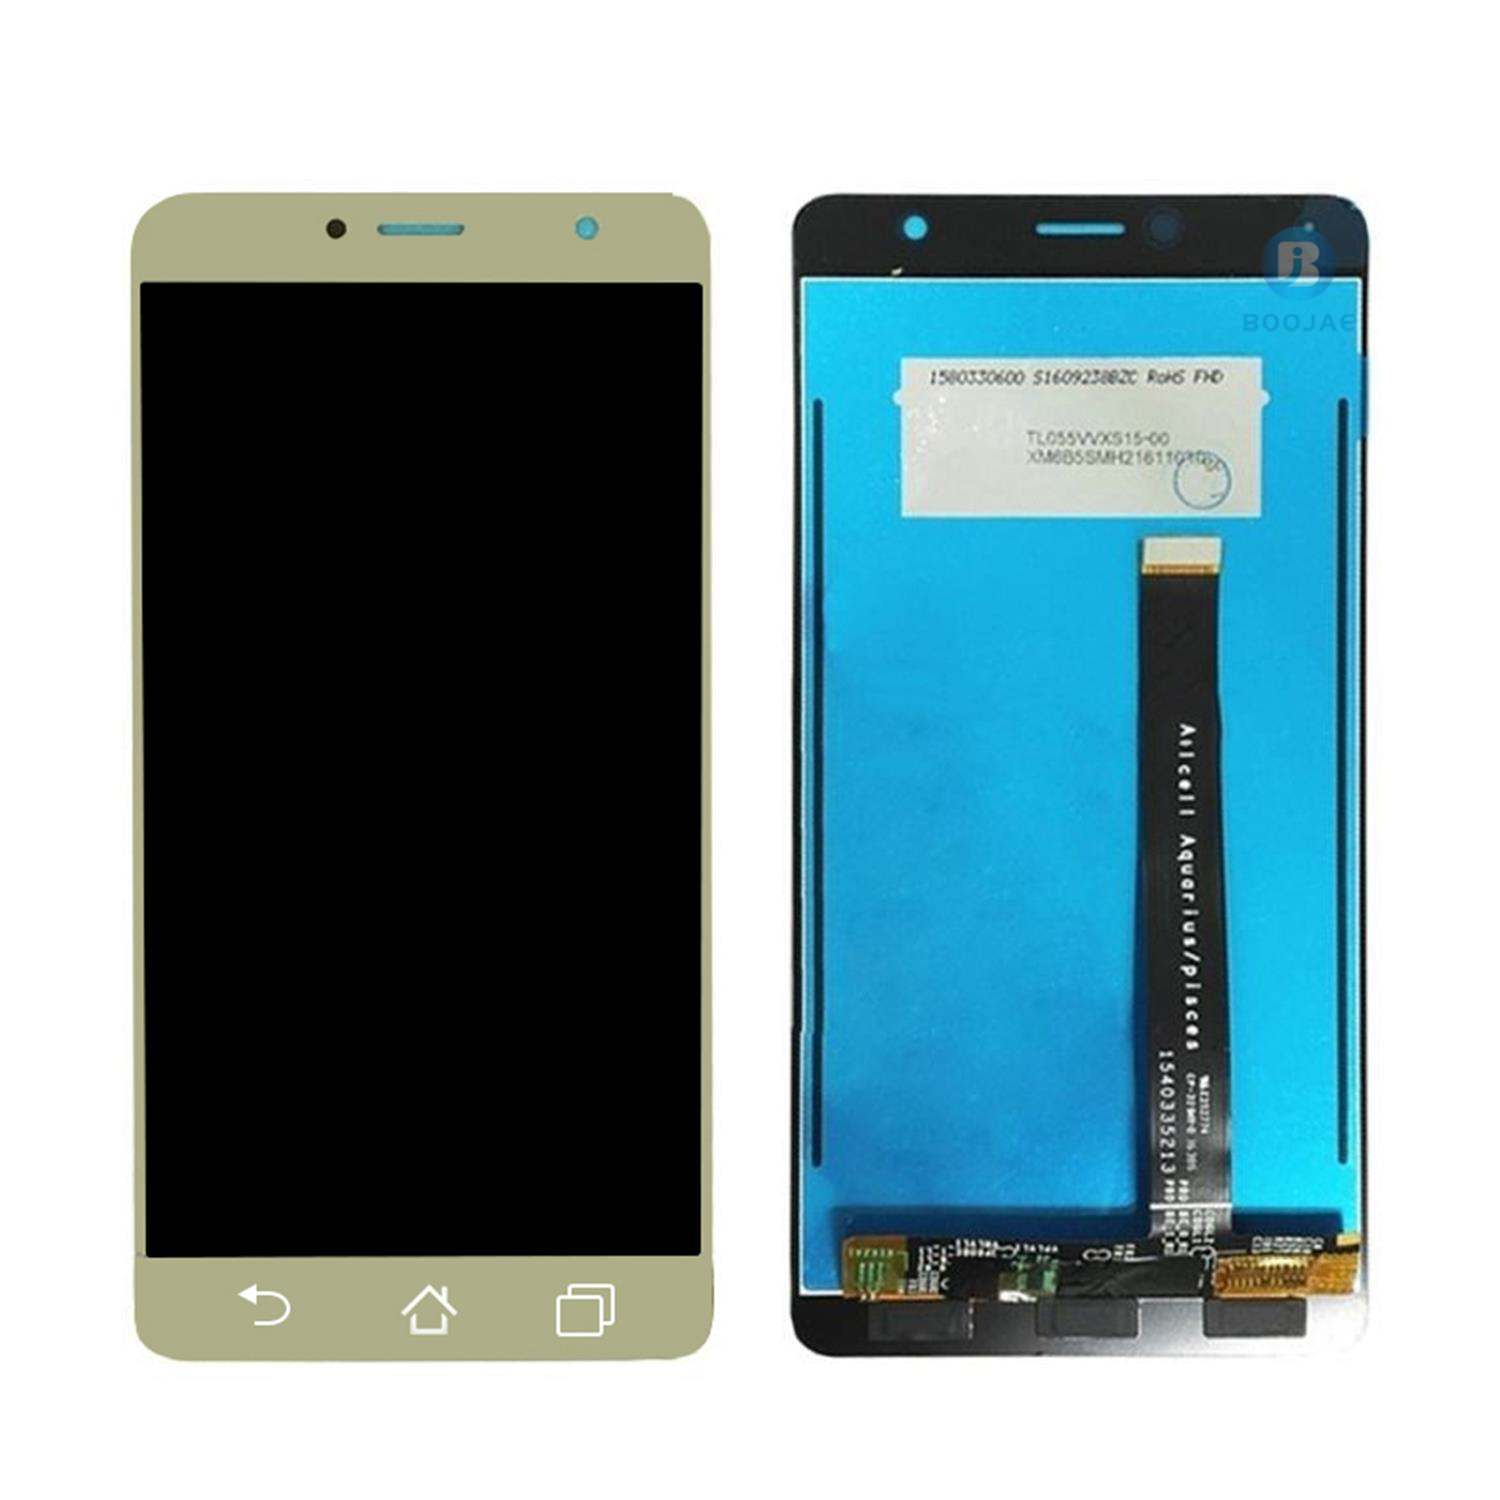 For Asus Zenfone ZS550KL LCD Screen Display and Touch Panel Digitizer Assembly Replacement